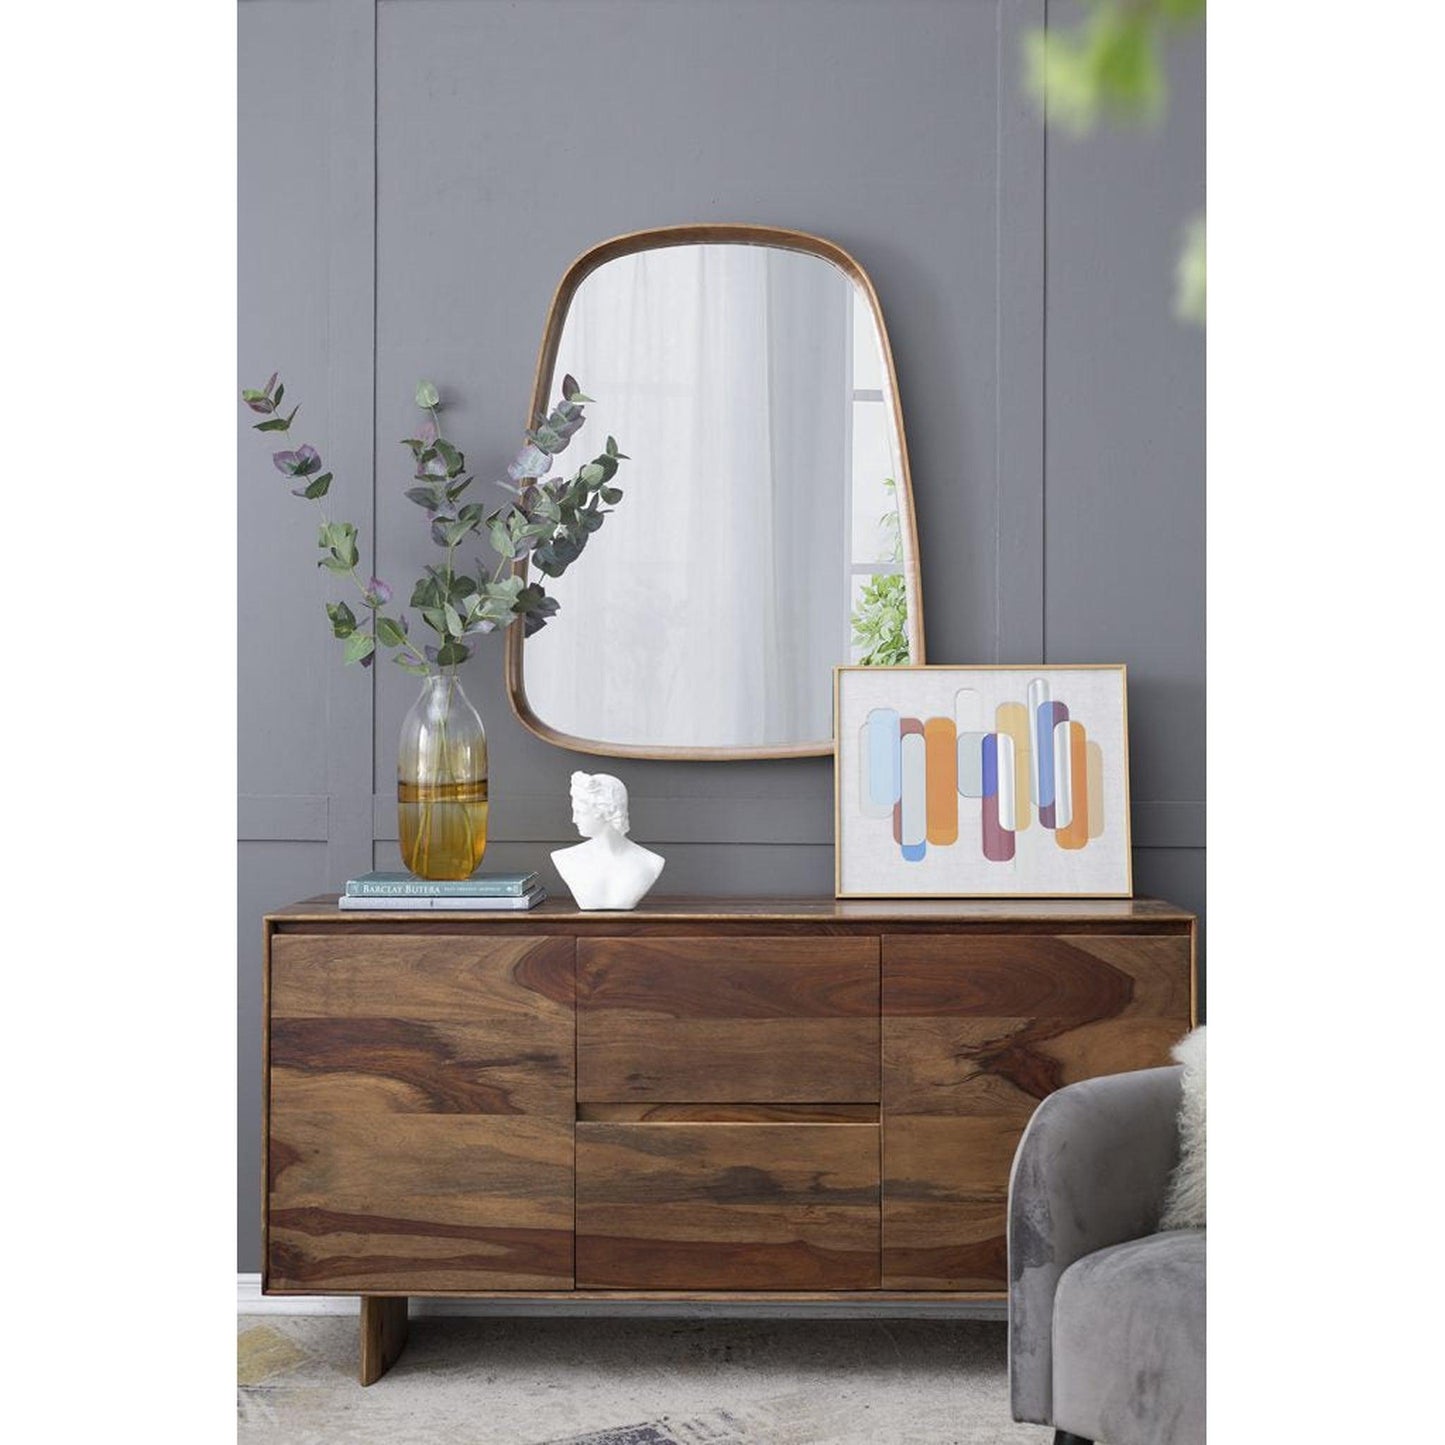 A&B Home Wayne 27" x 37" Bundle of 8 Rectangular Shape With Curved Edges Brown Wooden Frame Wall-Mounted Mirror